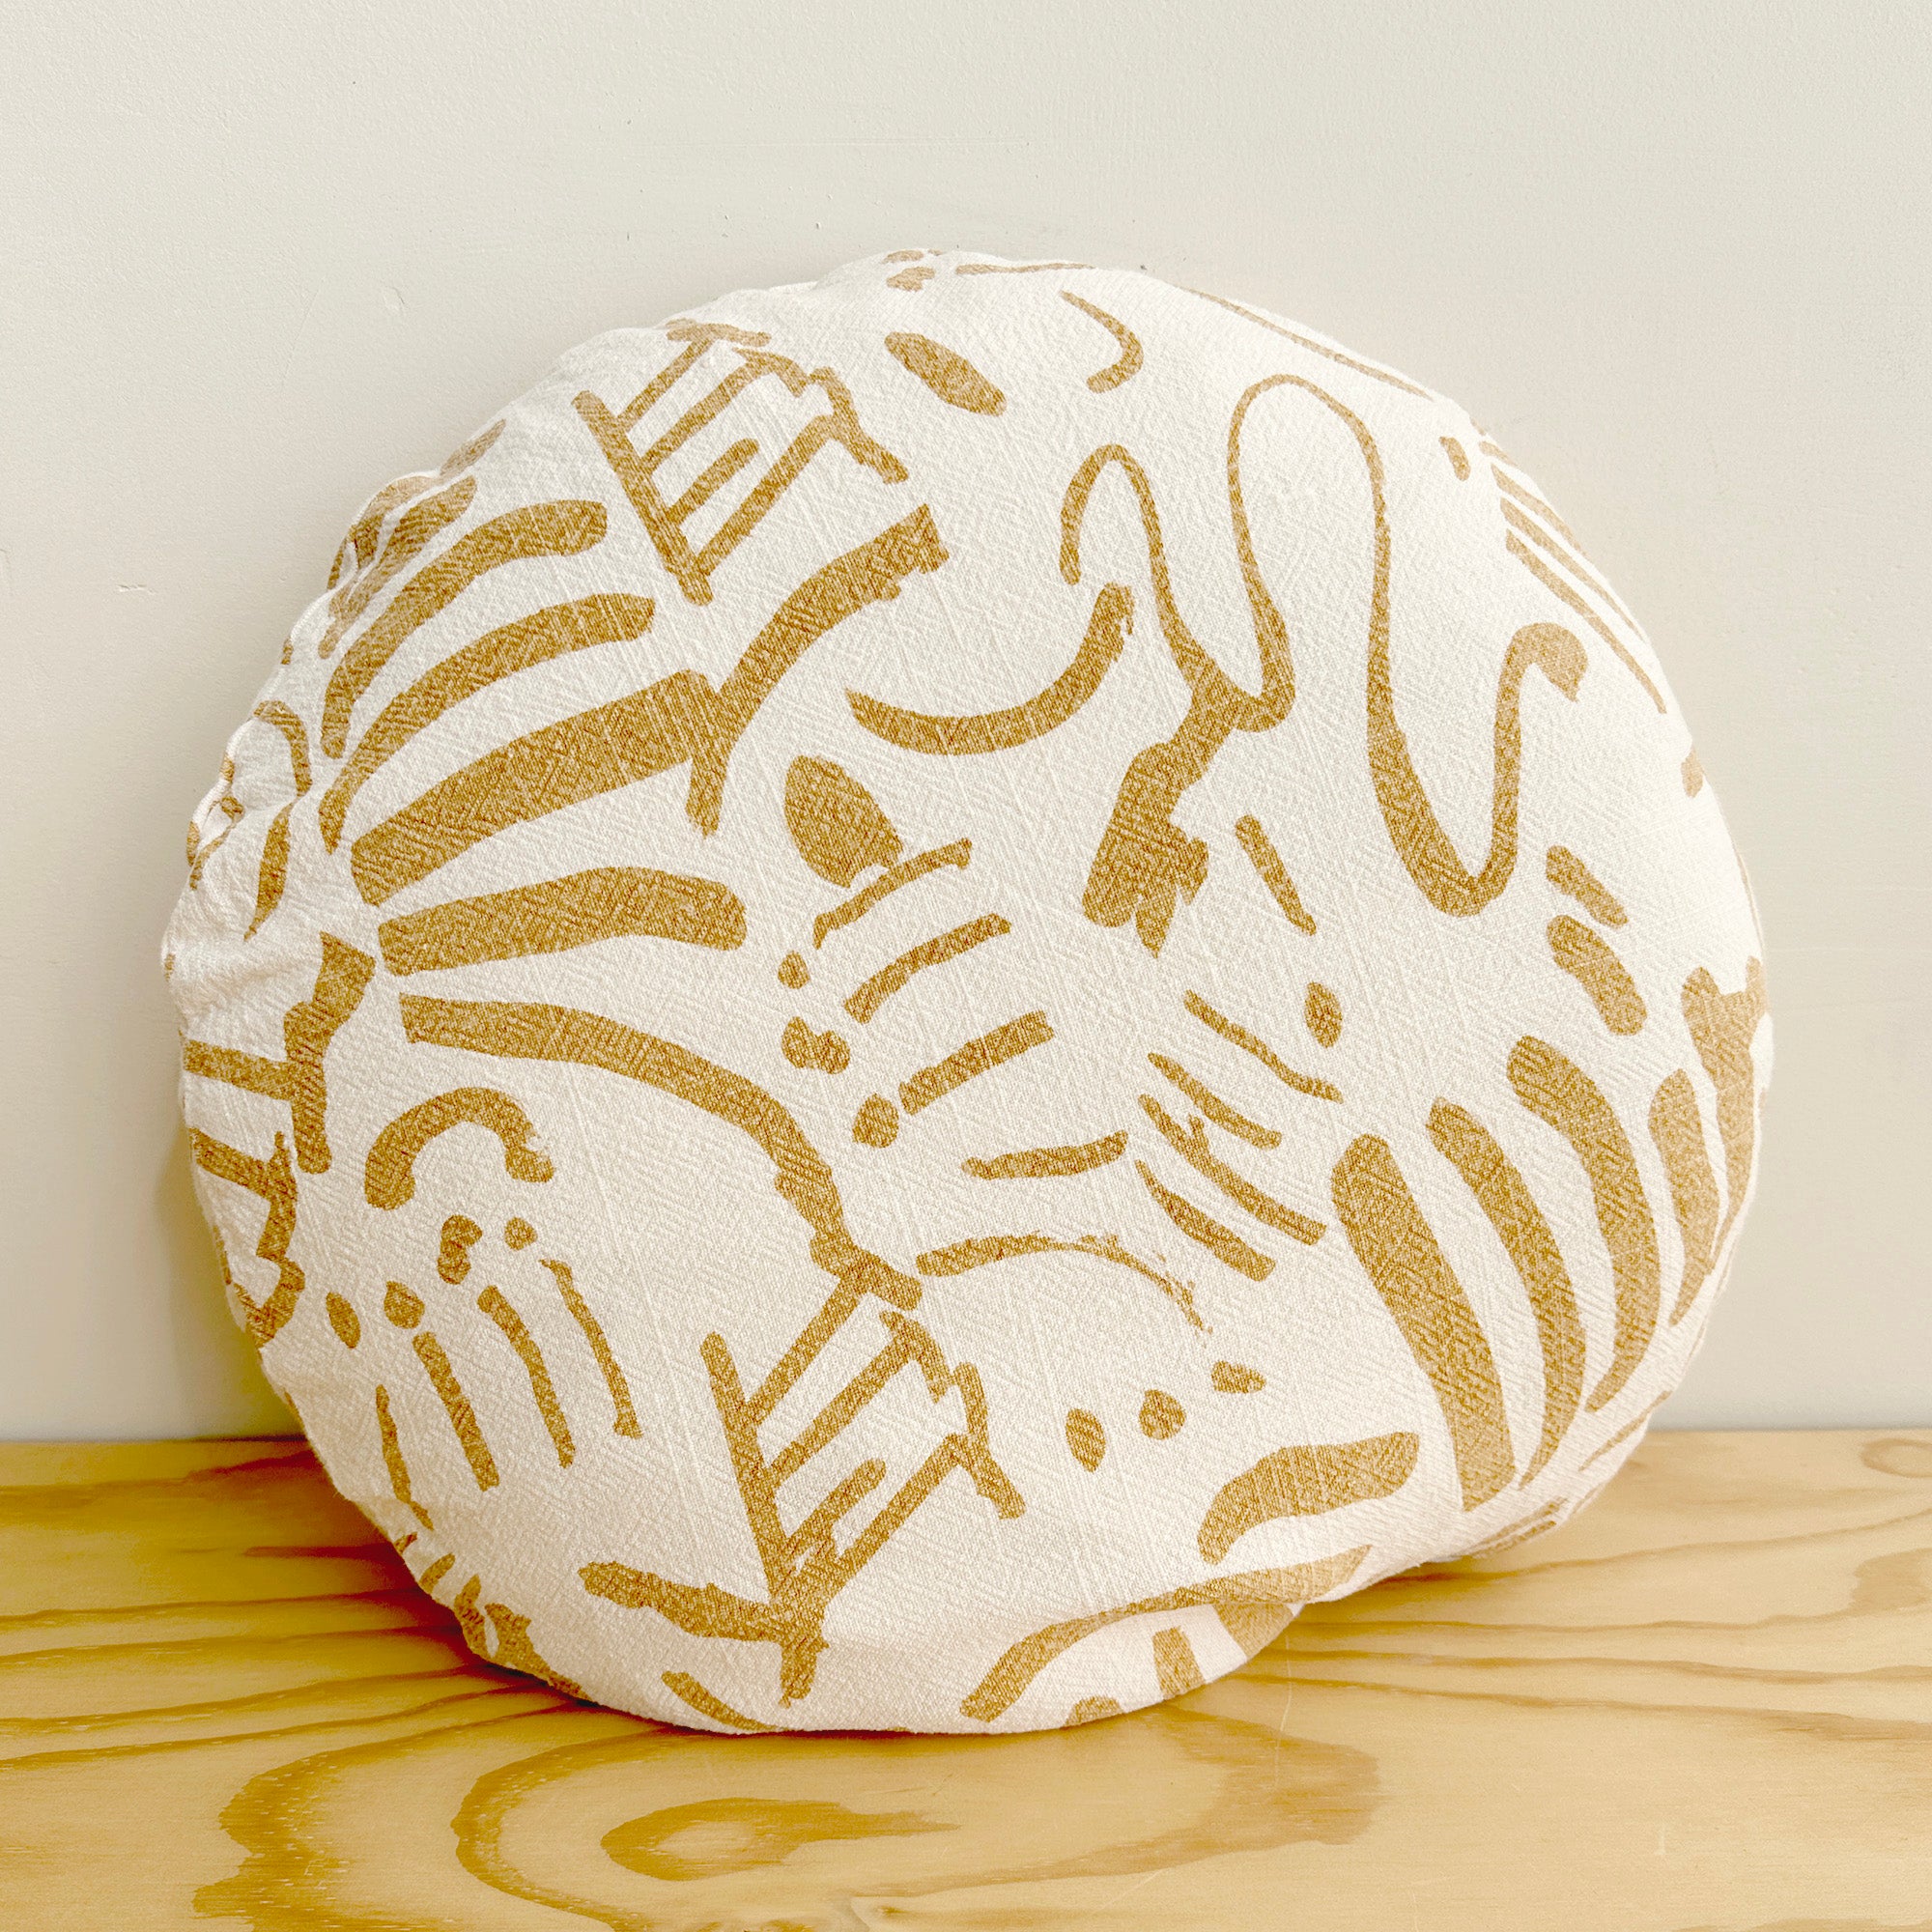 The Round Throw Pillow - Fold in Gold